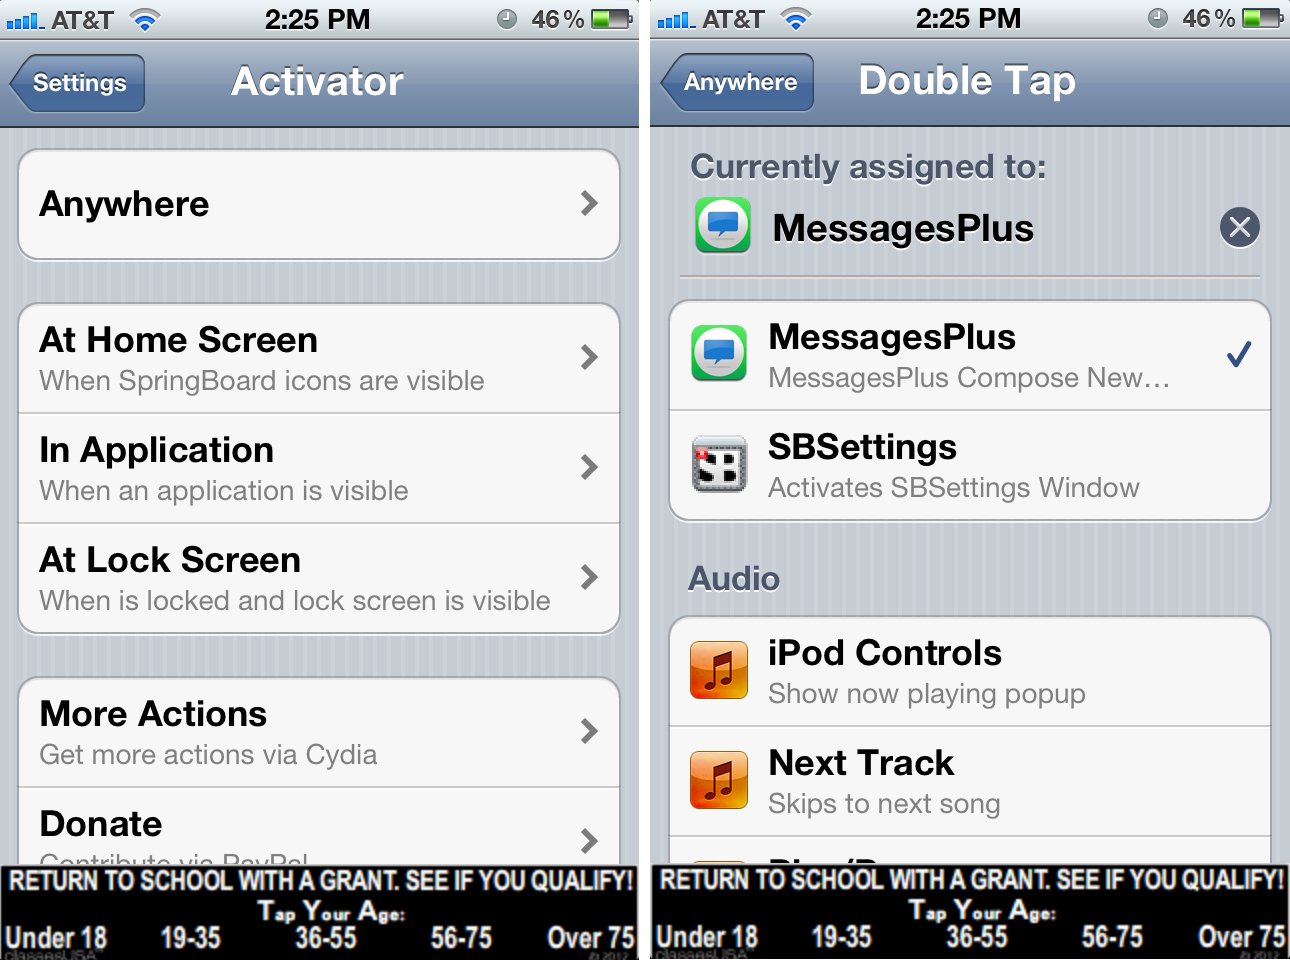 How to set a gesture with Activator